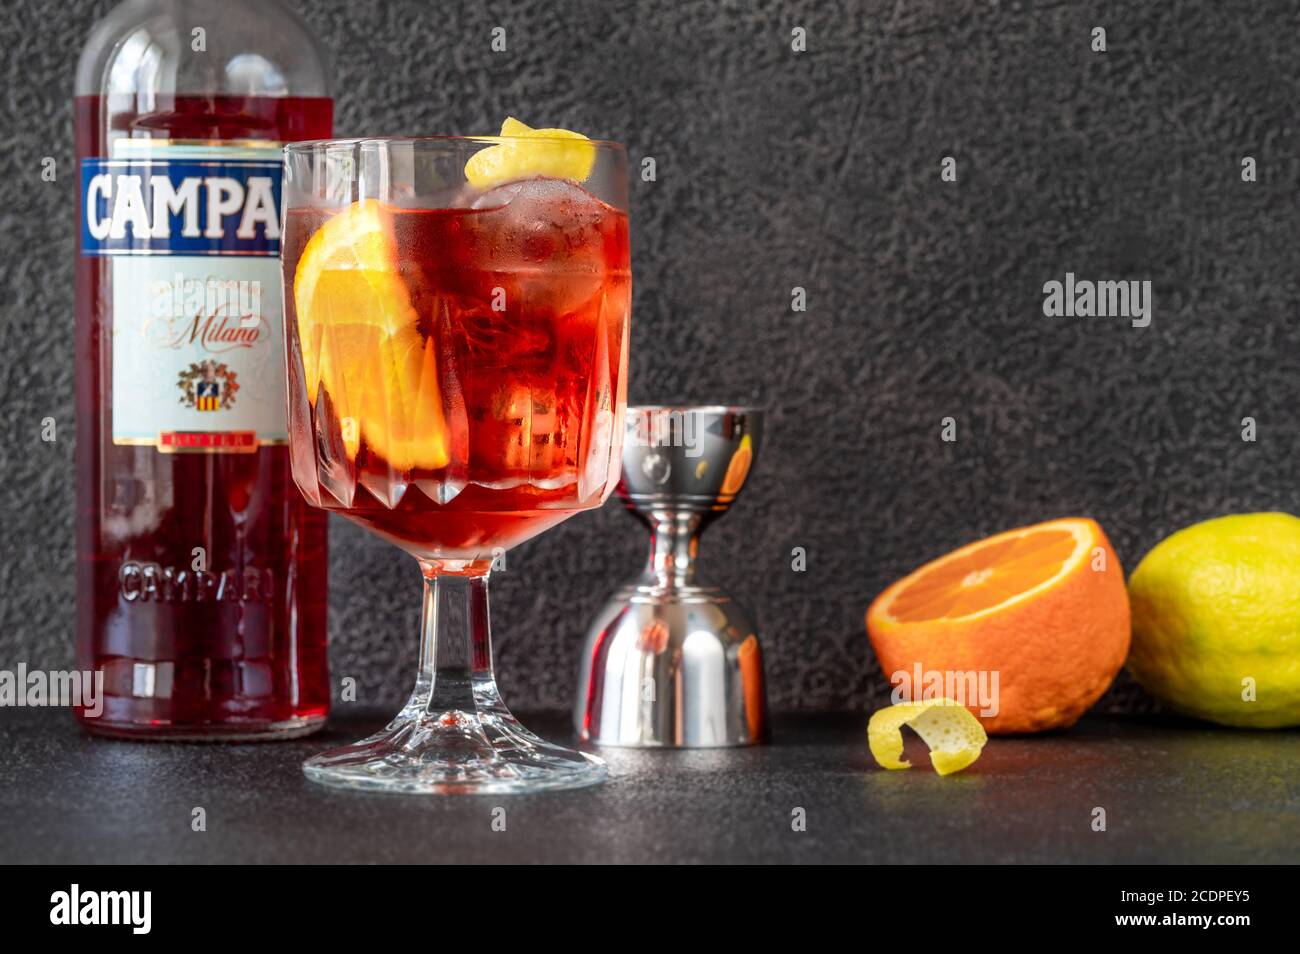 SUMY, UKRAINE - JUL 17, 2020: Americano cocktail made of sweet vermuth and Campari which is an Italian alcoholic liqueur, considered an aperitif, obta Stock Photo